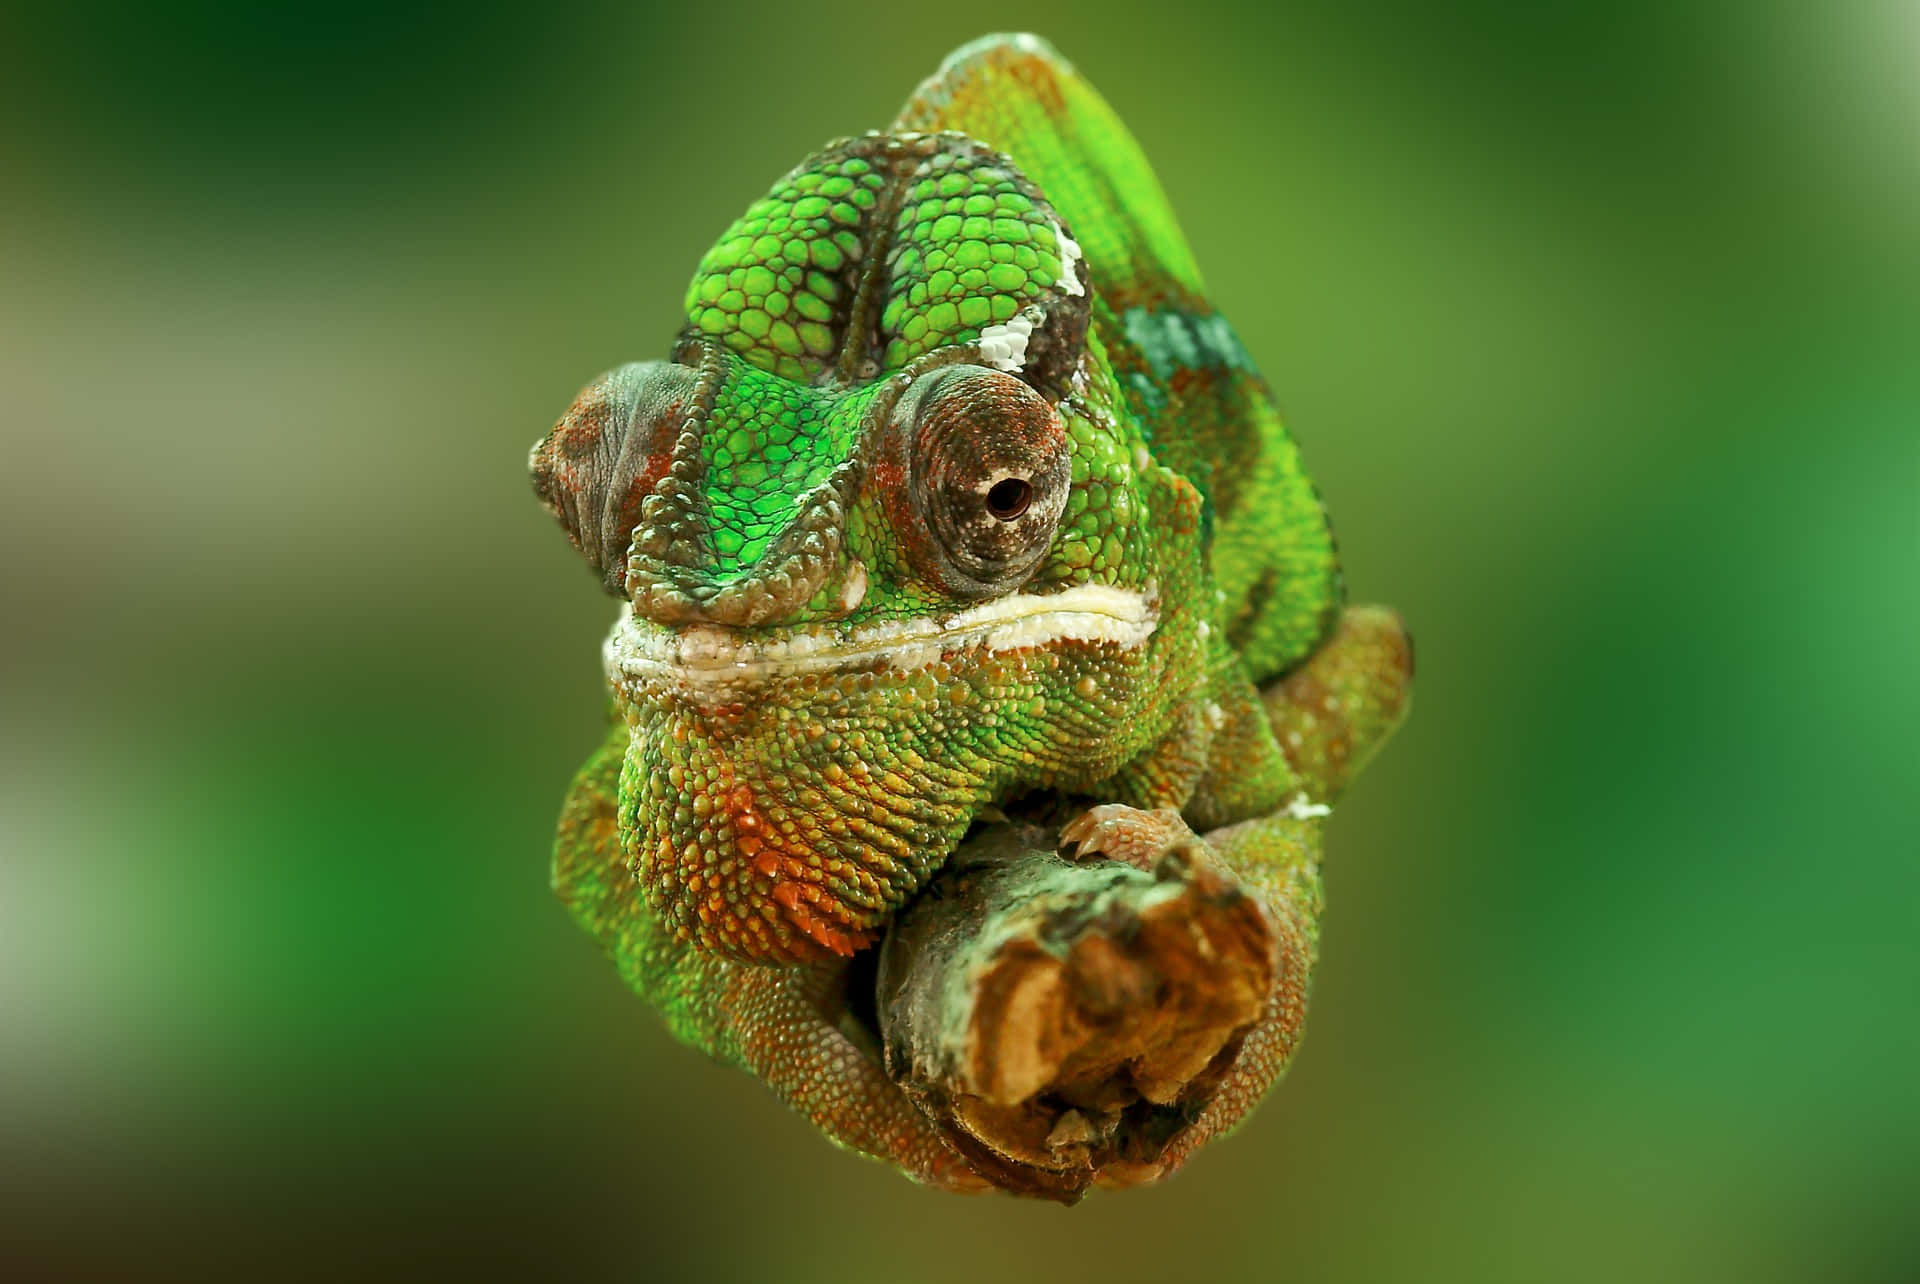 Bright and Colorful Chameleon | Description: A bright and colorful chameleon in a close up photo | Related keywords: chameleon, lizard, reptile, herp, tropical, camouflage, pattern, vibrant, scales, scaly, tree, jungle, smell, swirl, spotted, patterned, threat, display